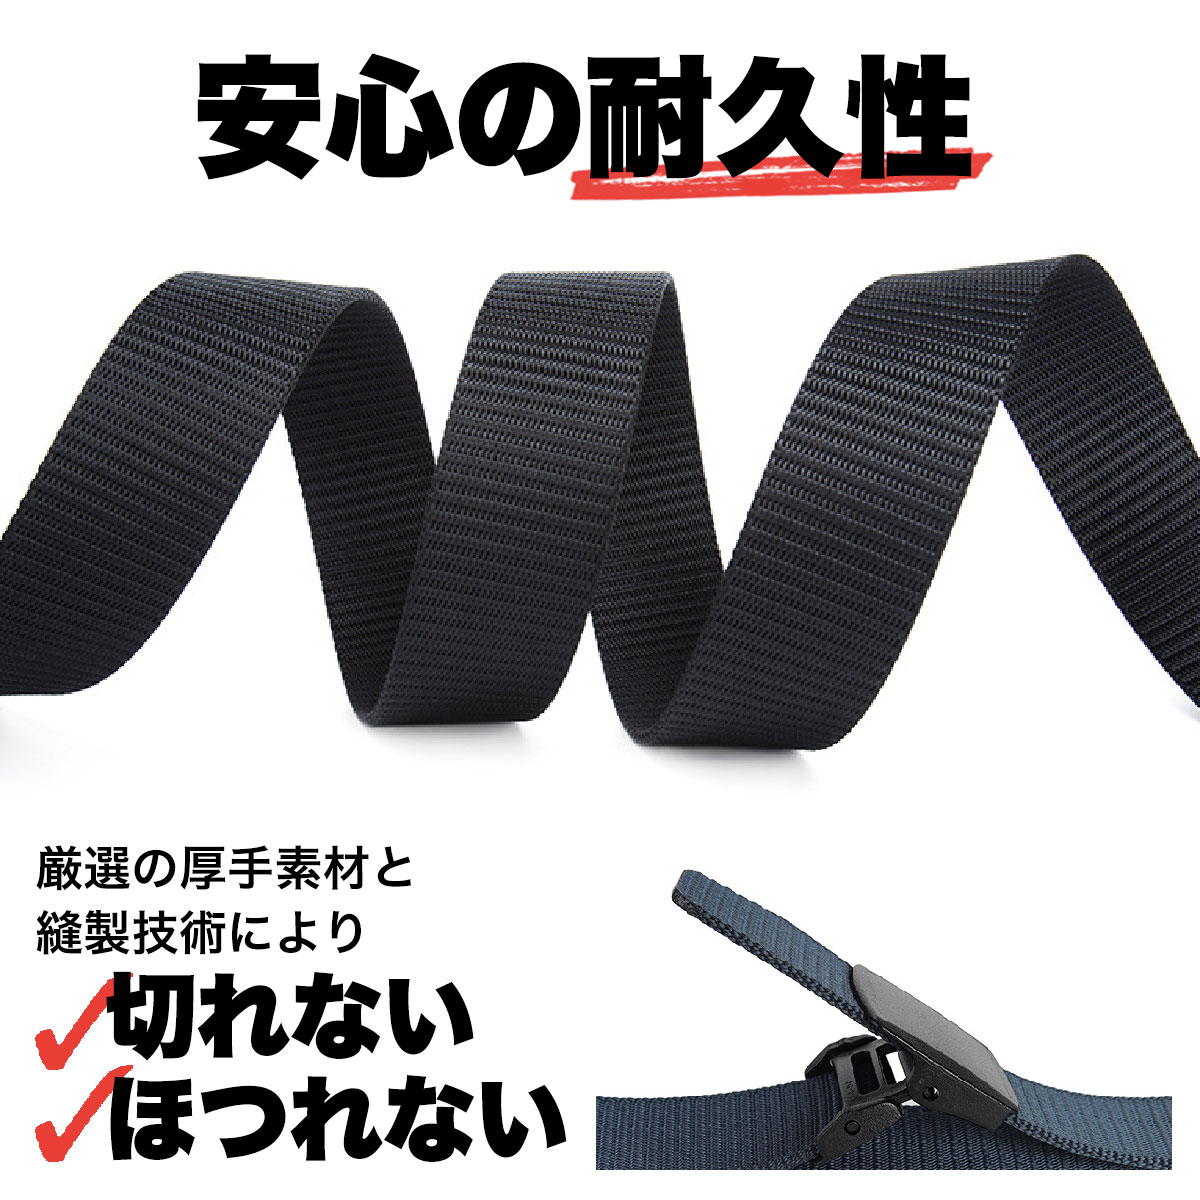  nylon belt men's belt work for hole none buckle military belt light weight light outdoor robust high quality mackerel ge- man and woman use working clothes for casual lady's 